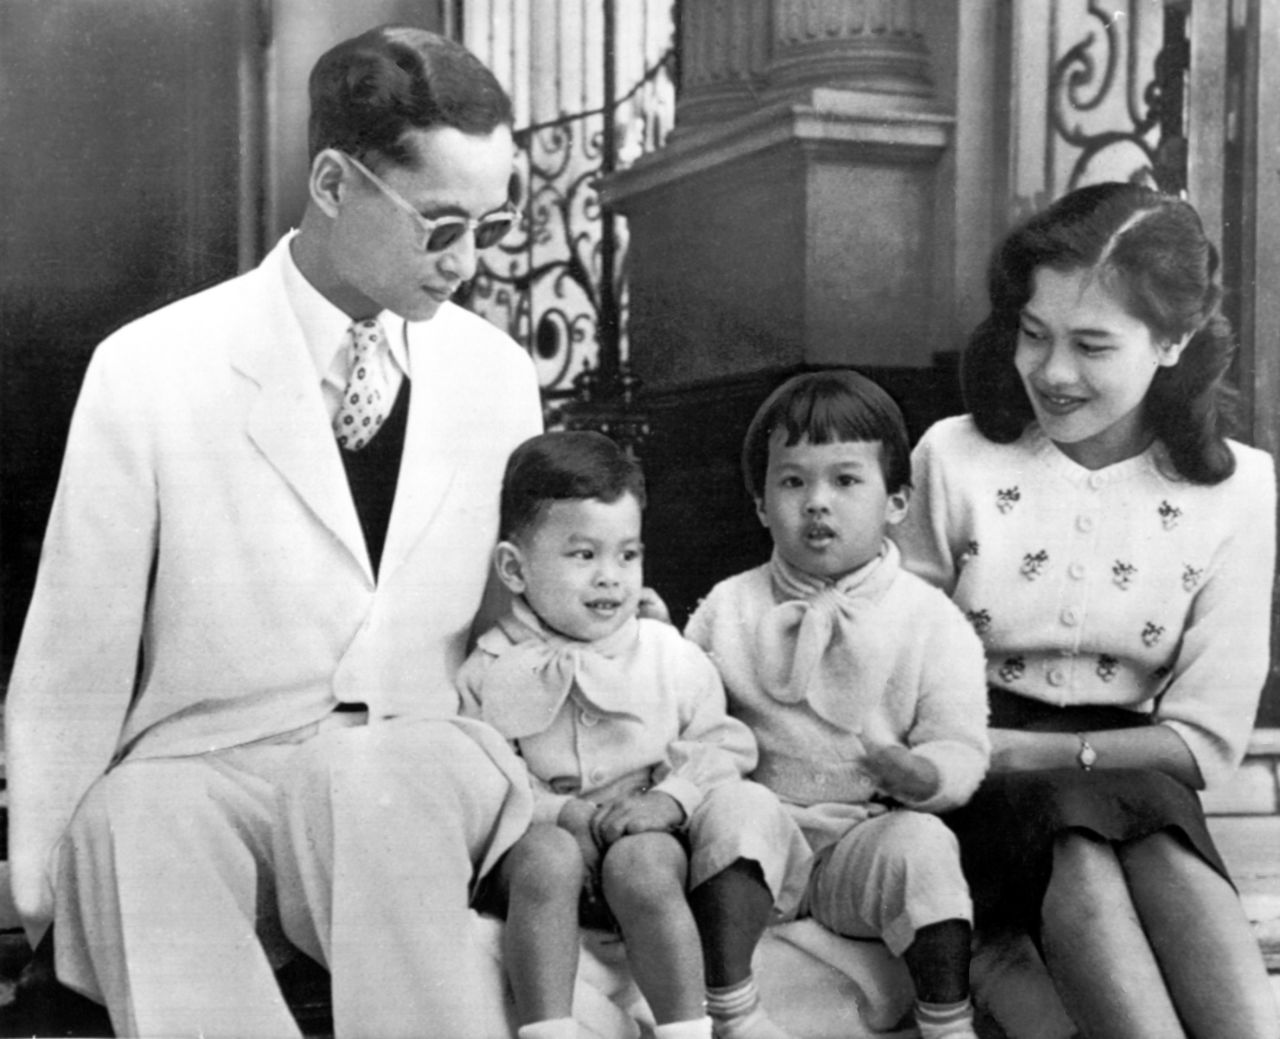 The royal family of Thailand sits on the steps of Bangkok's Chitralda Palace in 1955. King Bhumibol Adulyadej and Queen Sirikit are pictured with their children. Crown Prince Vajiralongkorn is on the left, next to Princess Ubol Ratana.